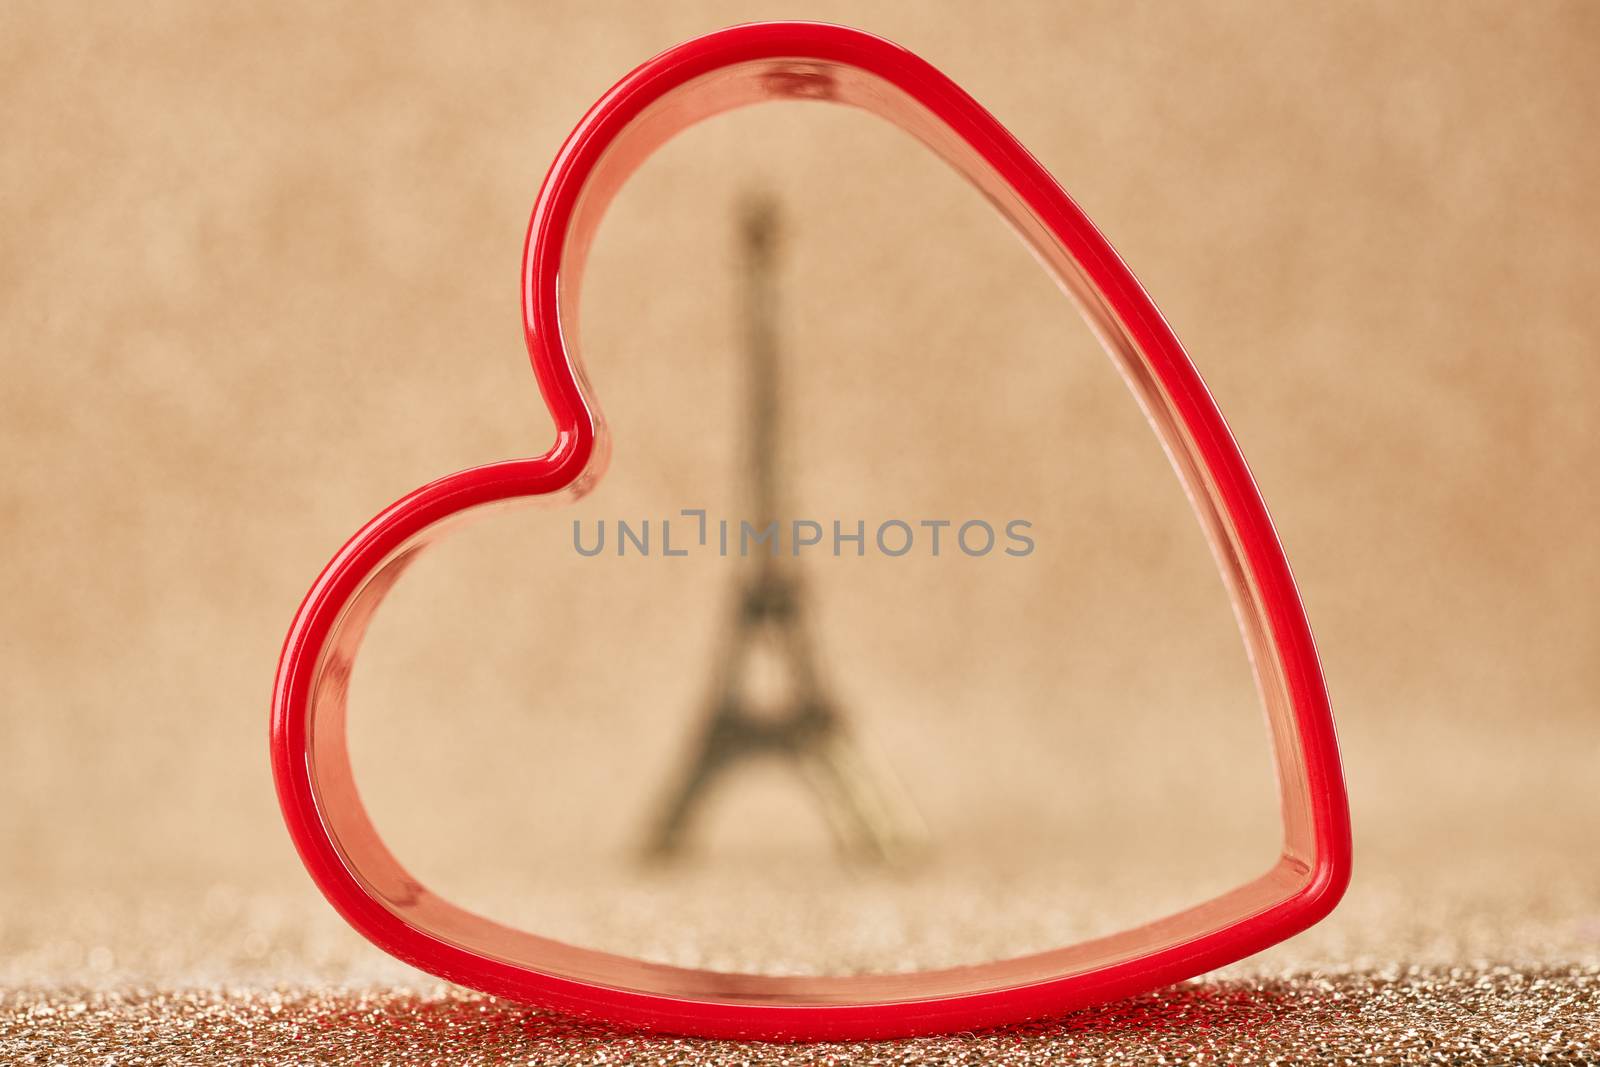 Valentines Day. Love. Red heart, Eiffel Tower, souvenir from Paris. Vintage retro  romantic style. Unusual creative art greeting card, gold background, copyspace